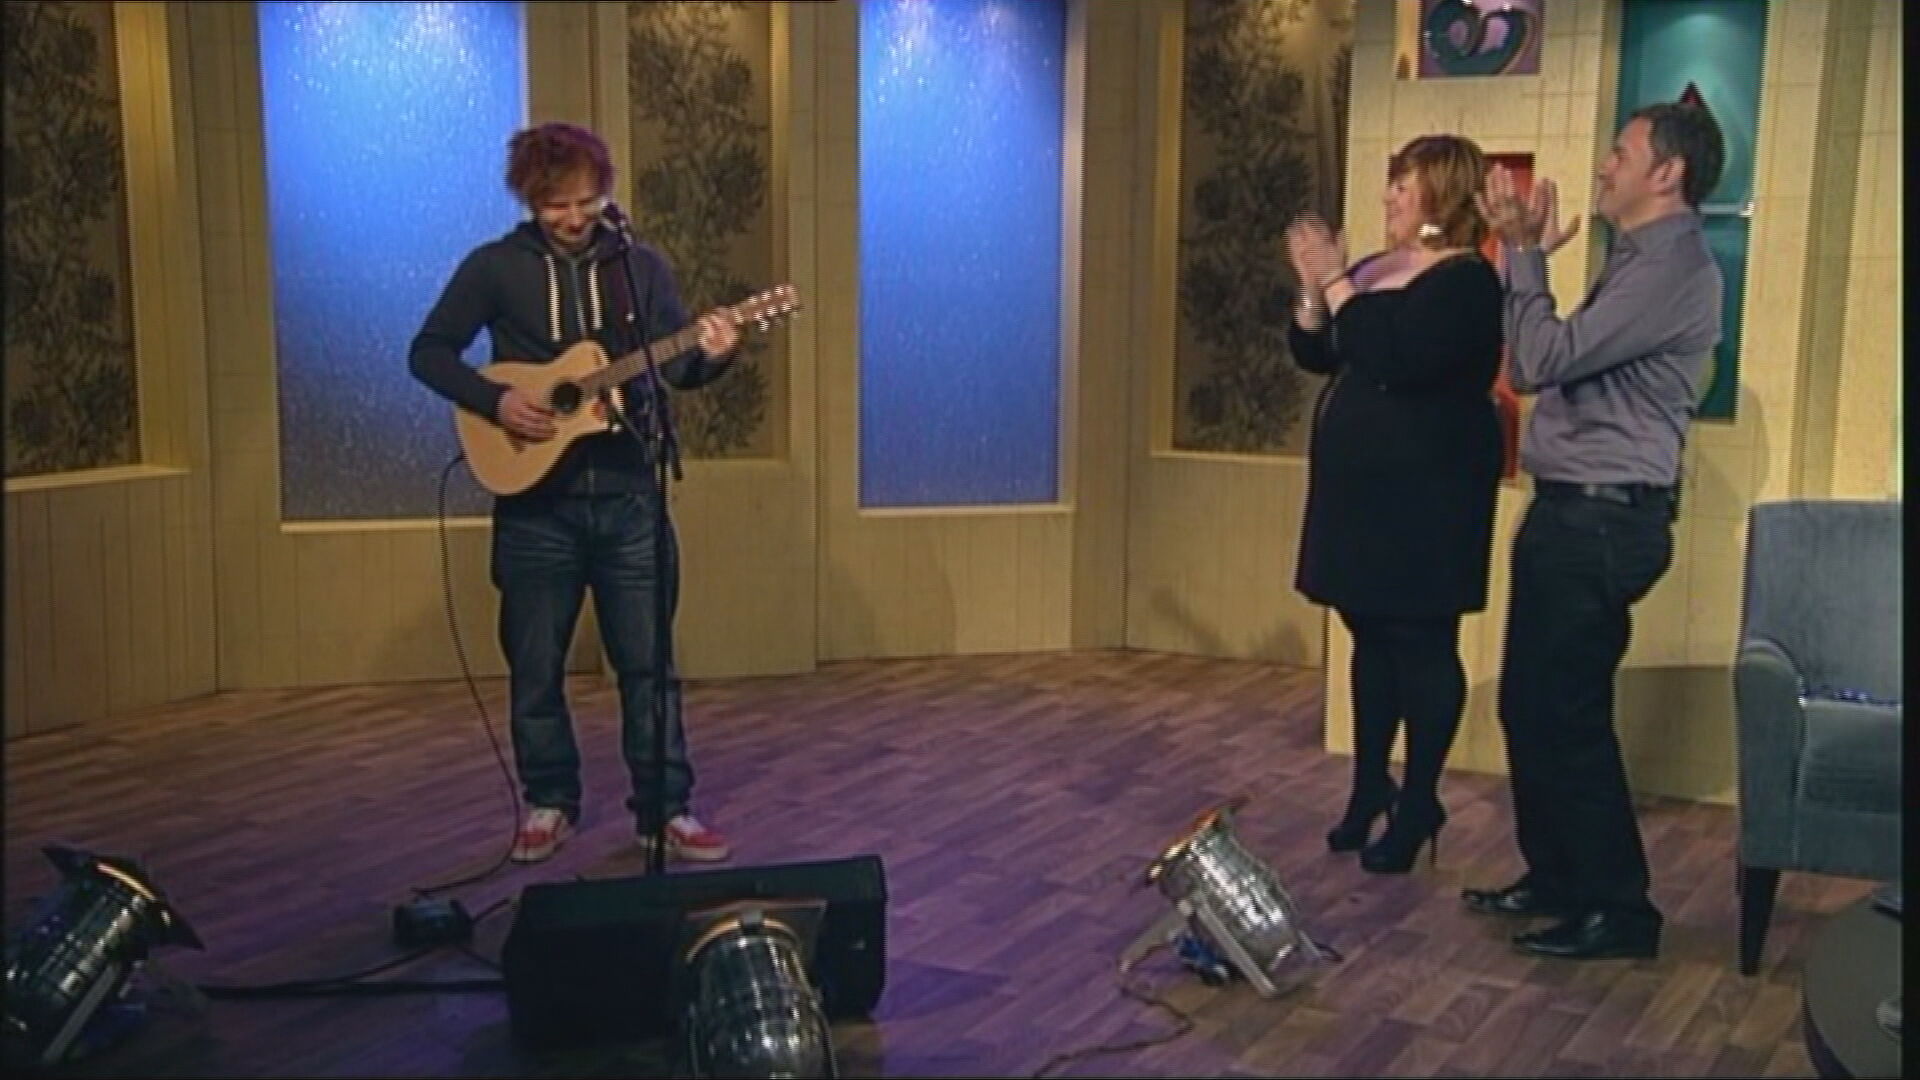 Ed Sheeran wowed viewers with his performance.